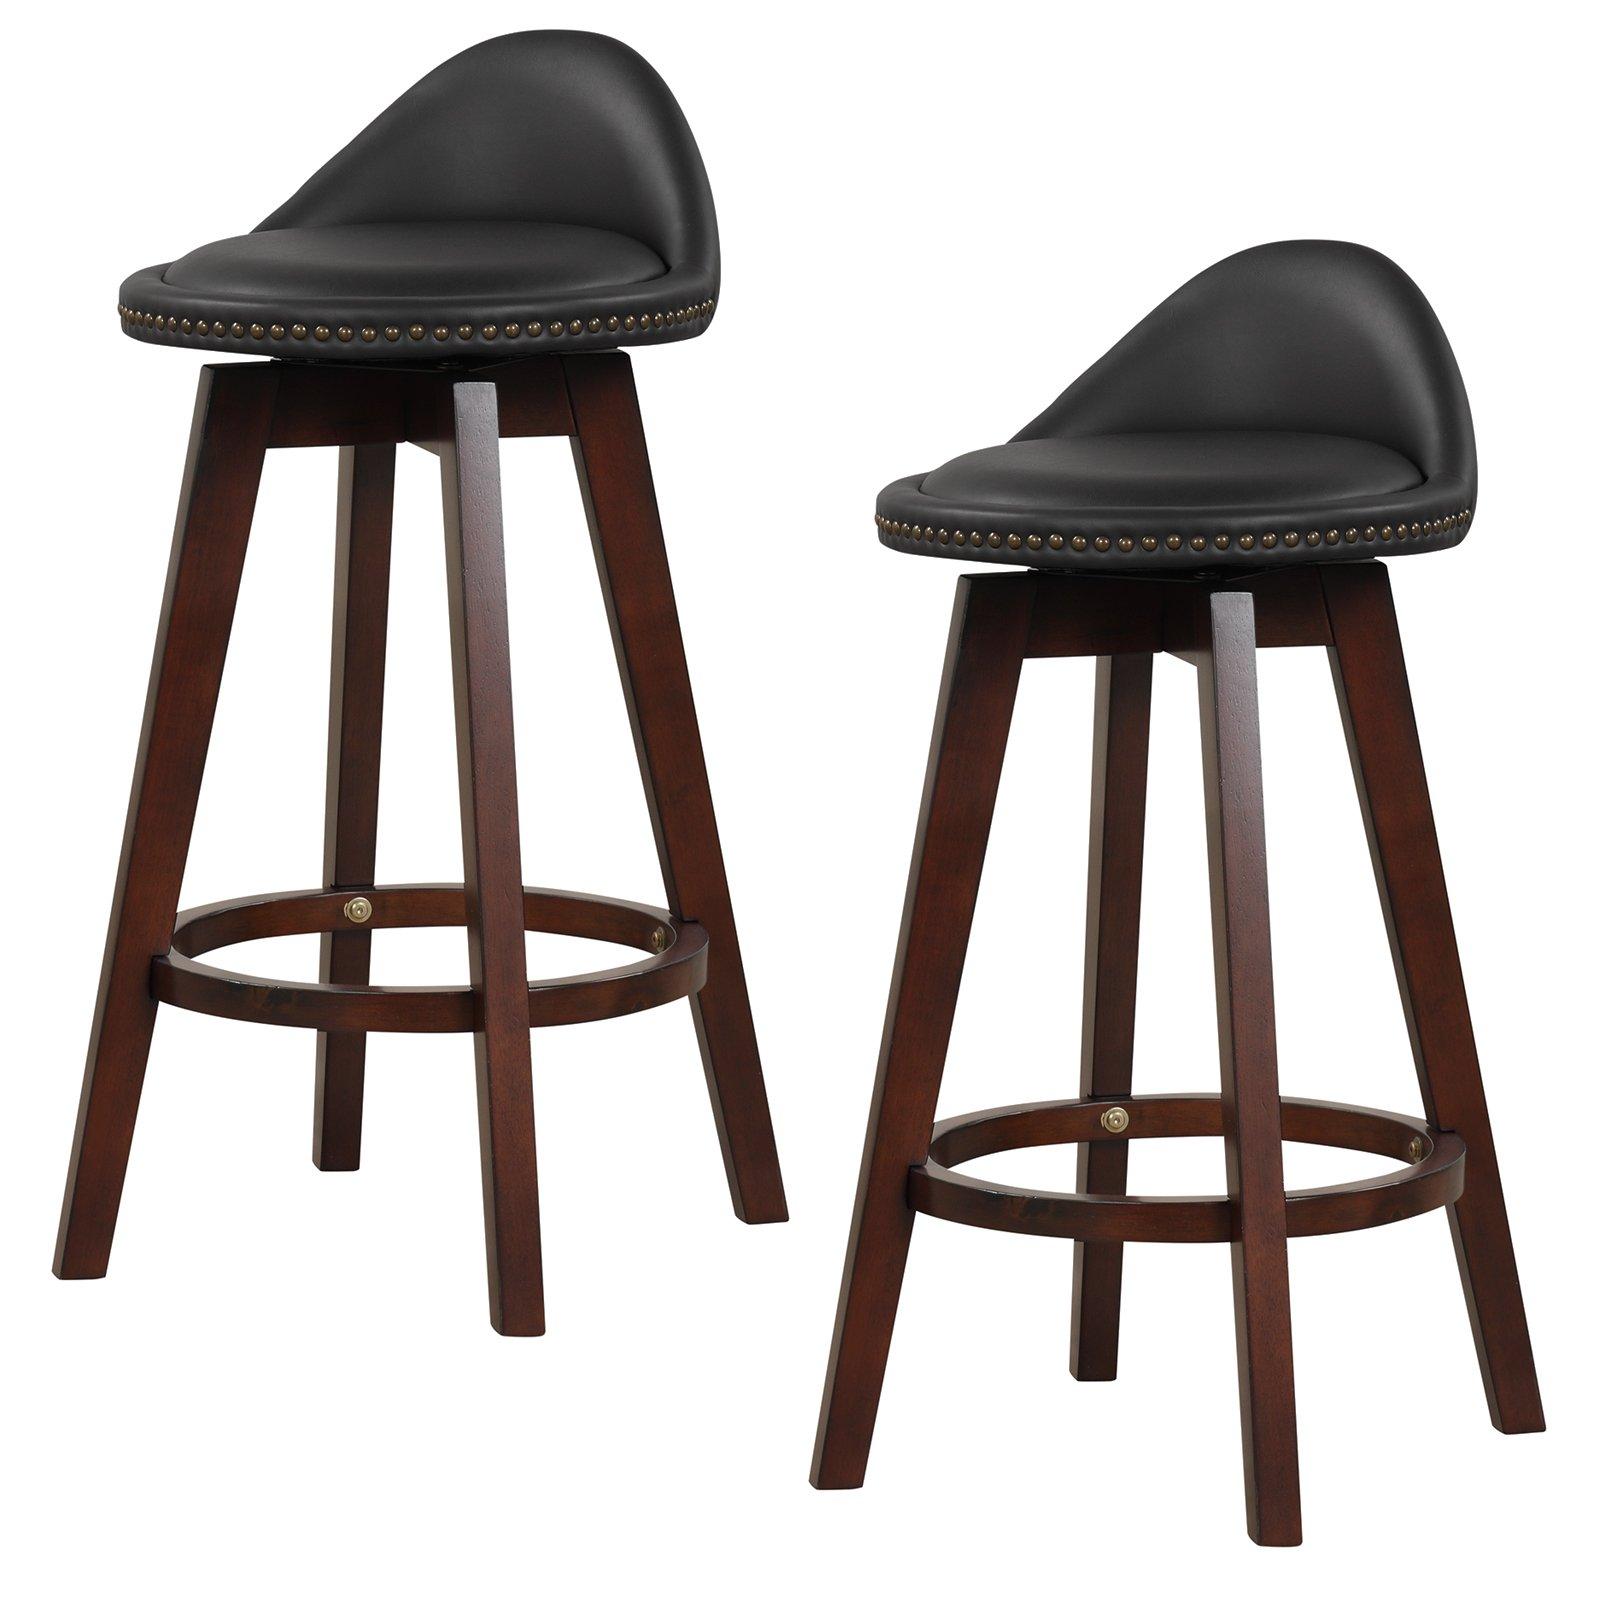 Set of 2 Bar Stools PVC Leather Counter Height Chair 360deg Swivel Padded Seat